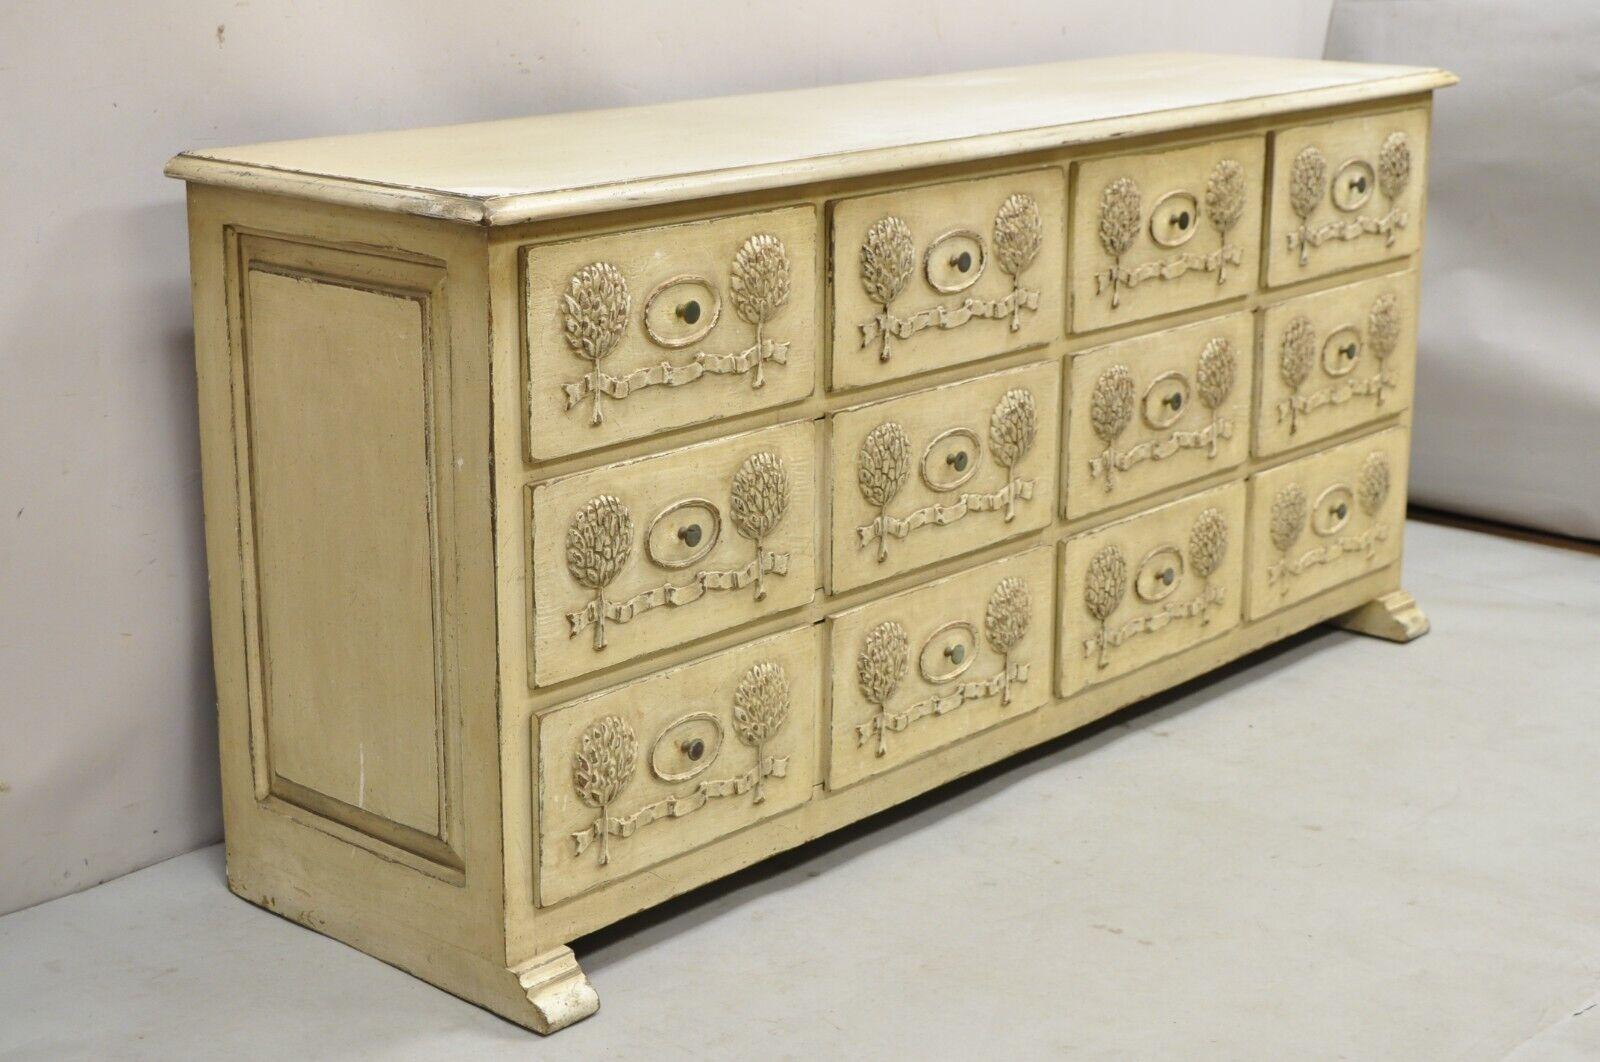 Vintage French Country Provincial Style Cream Distress Painted 8 Drawer Chest of Drawers by Roundtree Country Reproductions. Item features 8 dovetailed drawers, cream distress painted finish, heavy solid wood construction, hand carved drawers